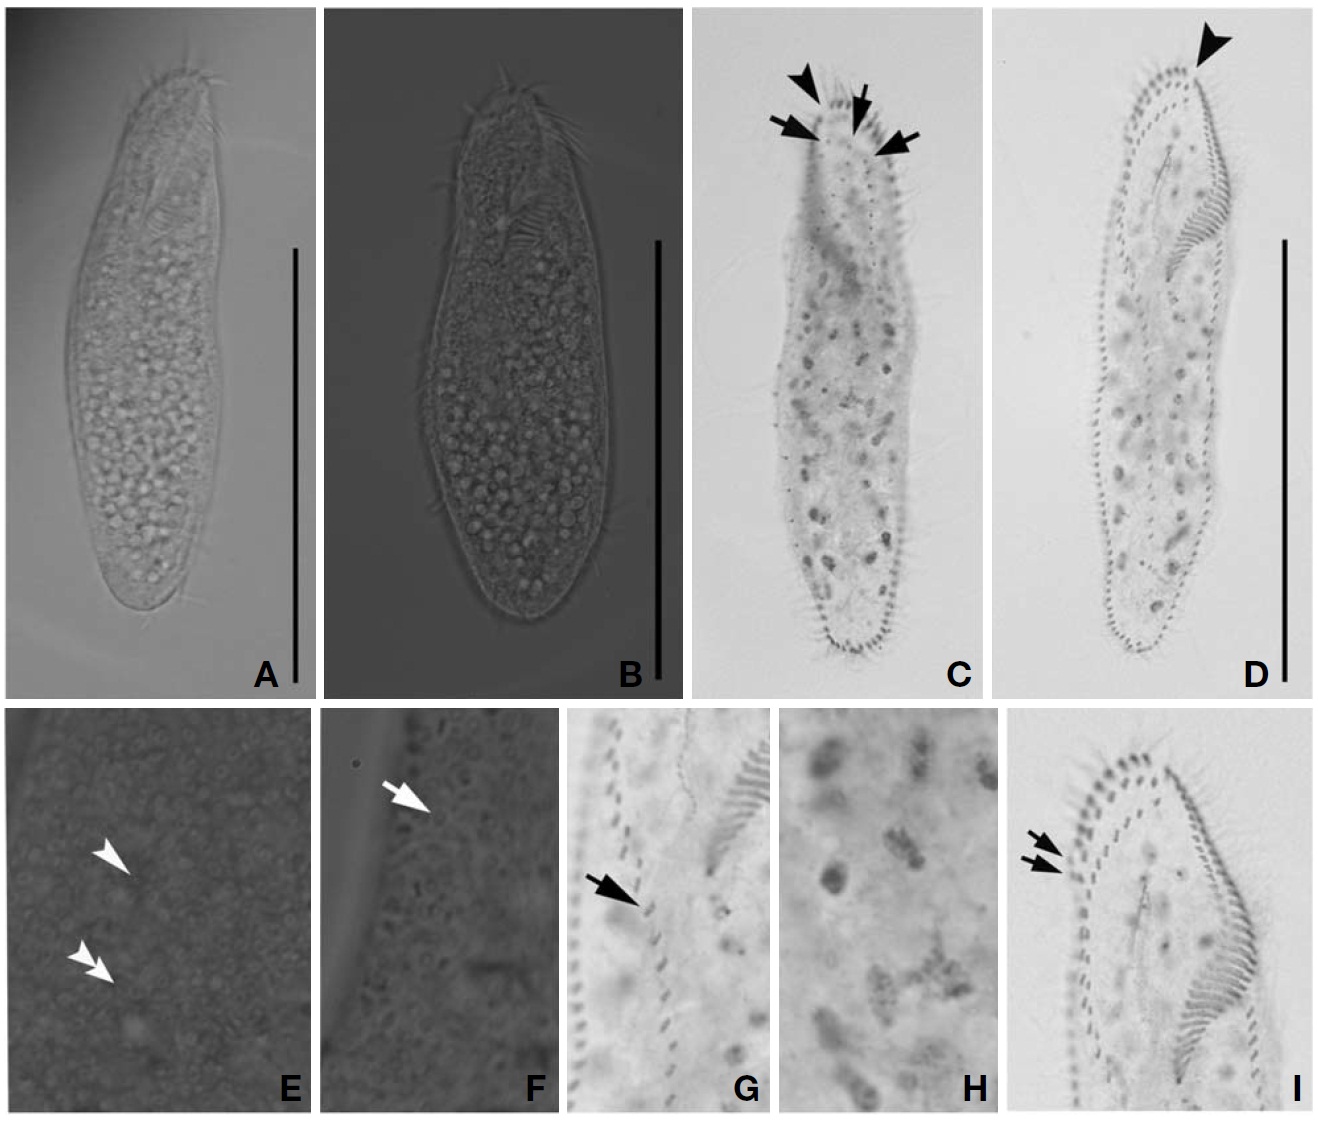 Morphology and infraciliature of Uroleptopsis citrina from live specimens (A B E F) and after protargol impregnation (C DG-I). A B Ventral views of live specimen; C Dorsal and (D G-I) ventral views of protargol-impregnated specimen; C Arrows markthe invariable three dorsal kineties; C D Arrowheads point to gap in adoral zone; D General ciliature of the specimen; E F Arrowand arrowheads indicate the two kinds of granules respectively; G Anterior pairs and single cirri (arrow mark) on the midventralcomplex; H Indicates macronucleus; I Frontal cirri (bicorona); arrows show two frontoterminal cirri. Scale bars=100 μm.